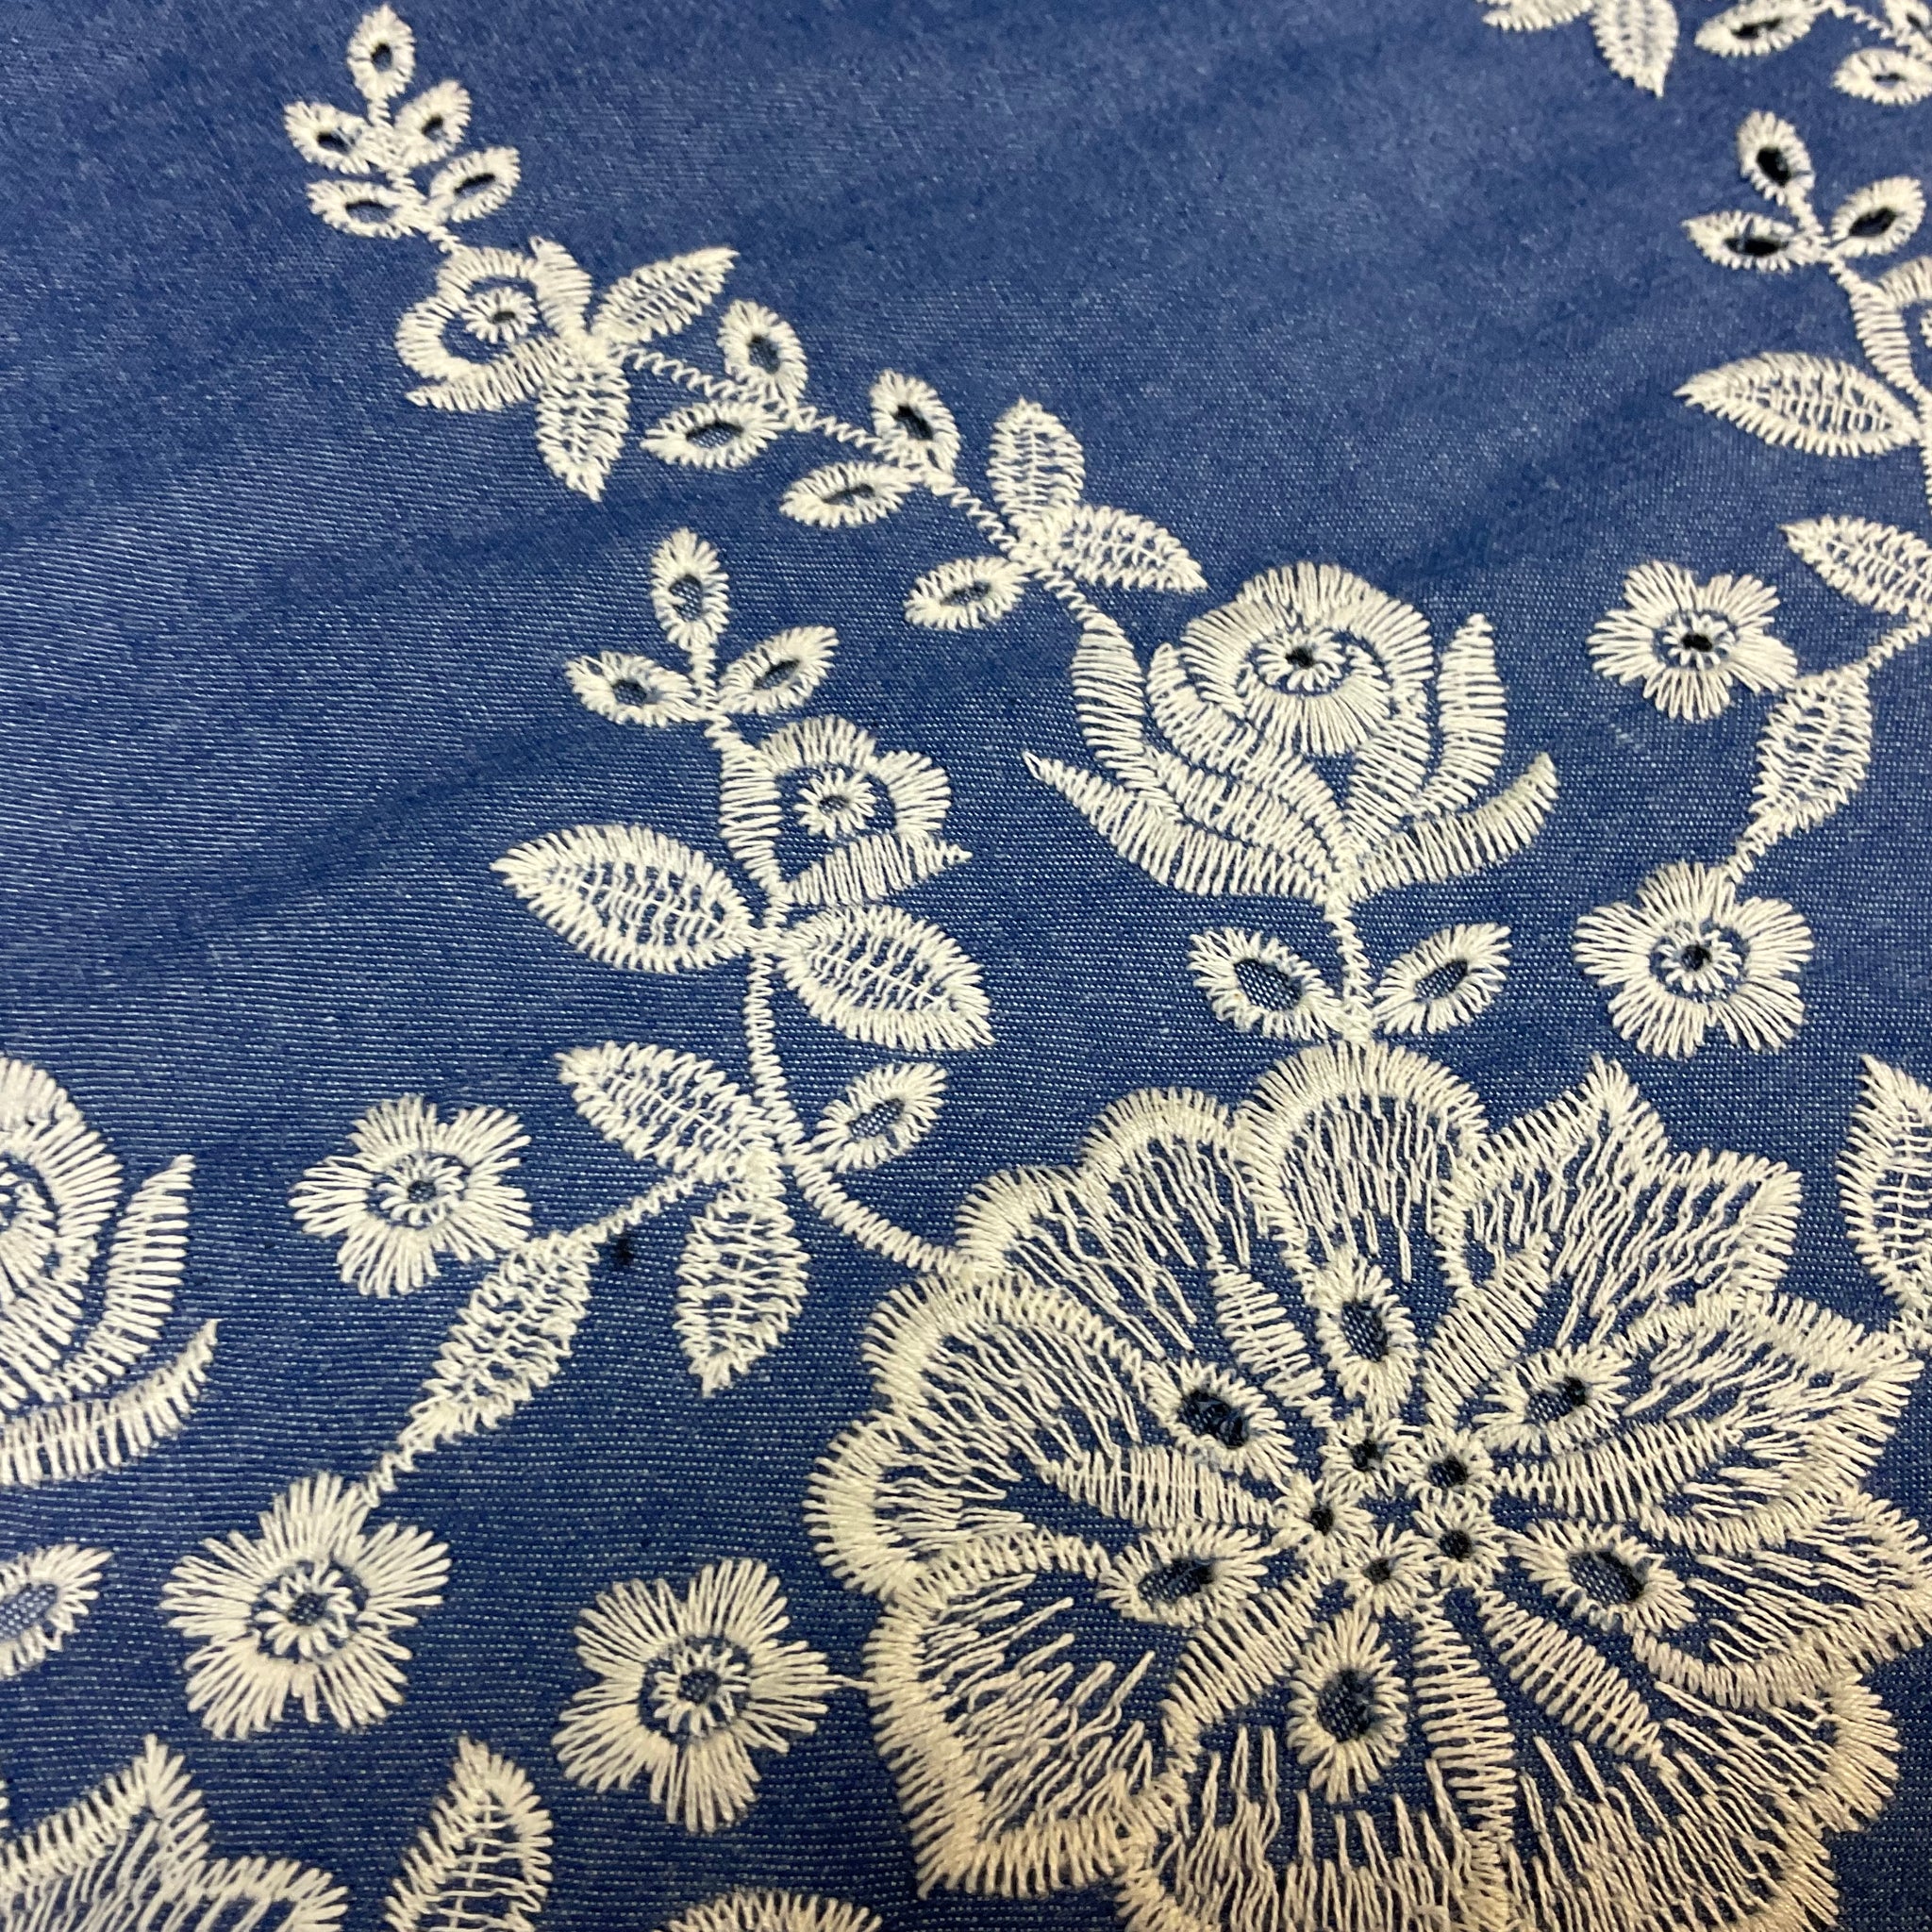 Light Blue One sided Embroidery Trouser Skirt jacket fabric M1819